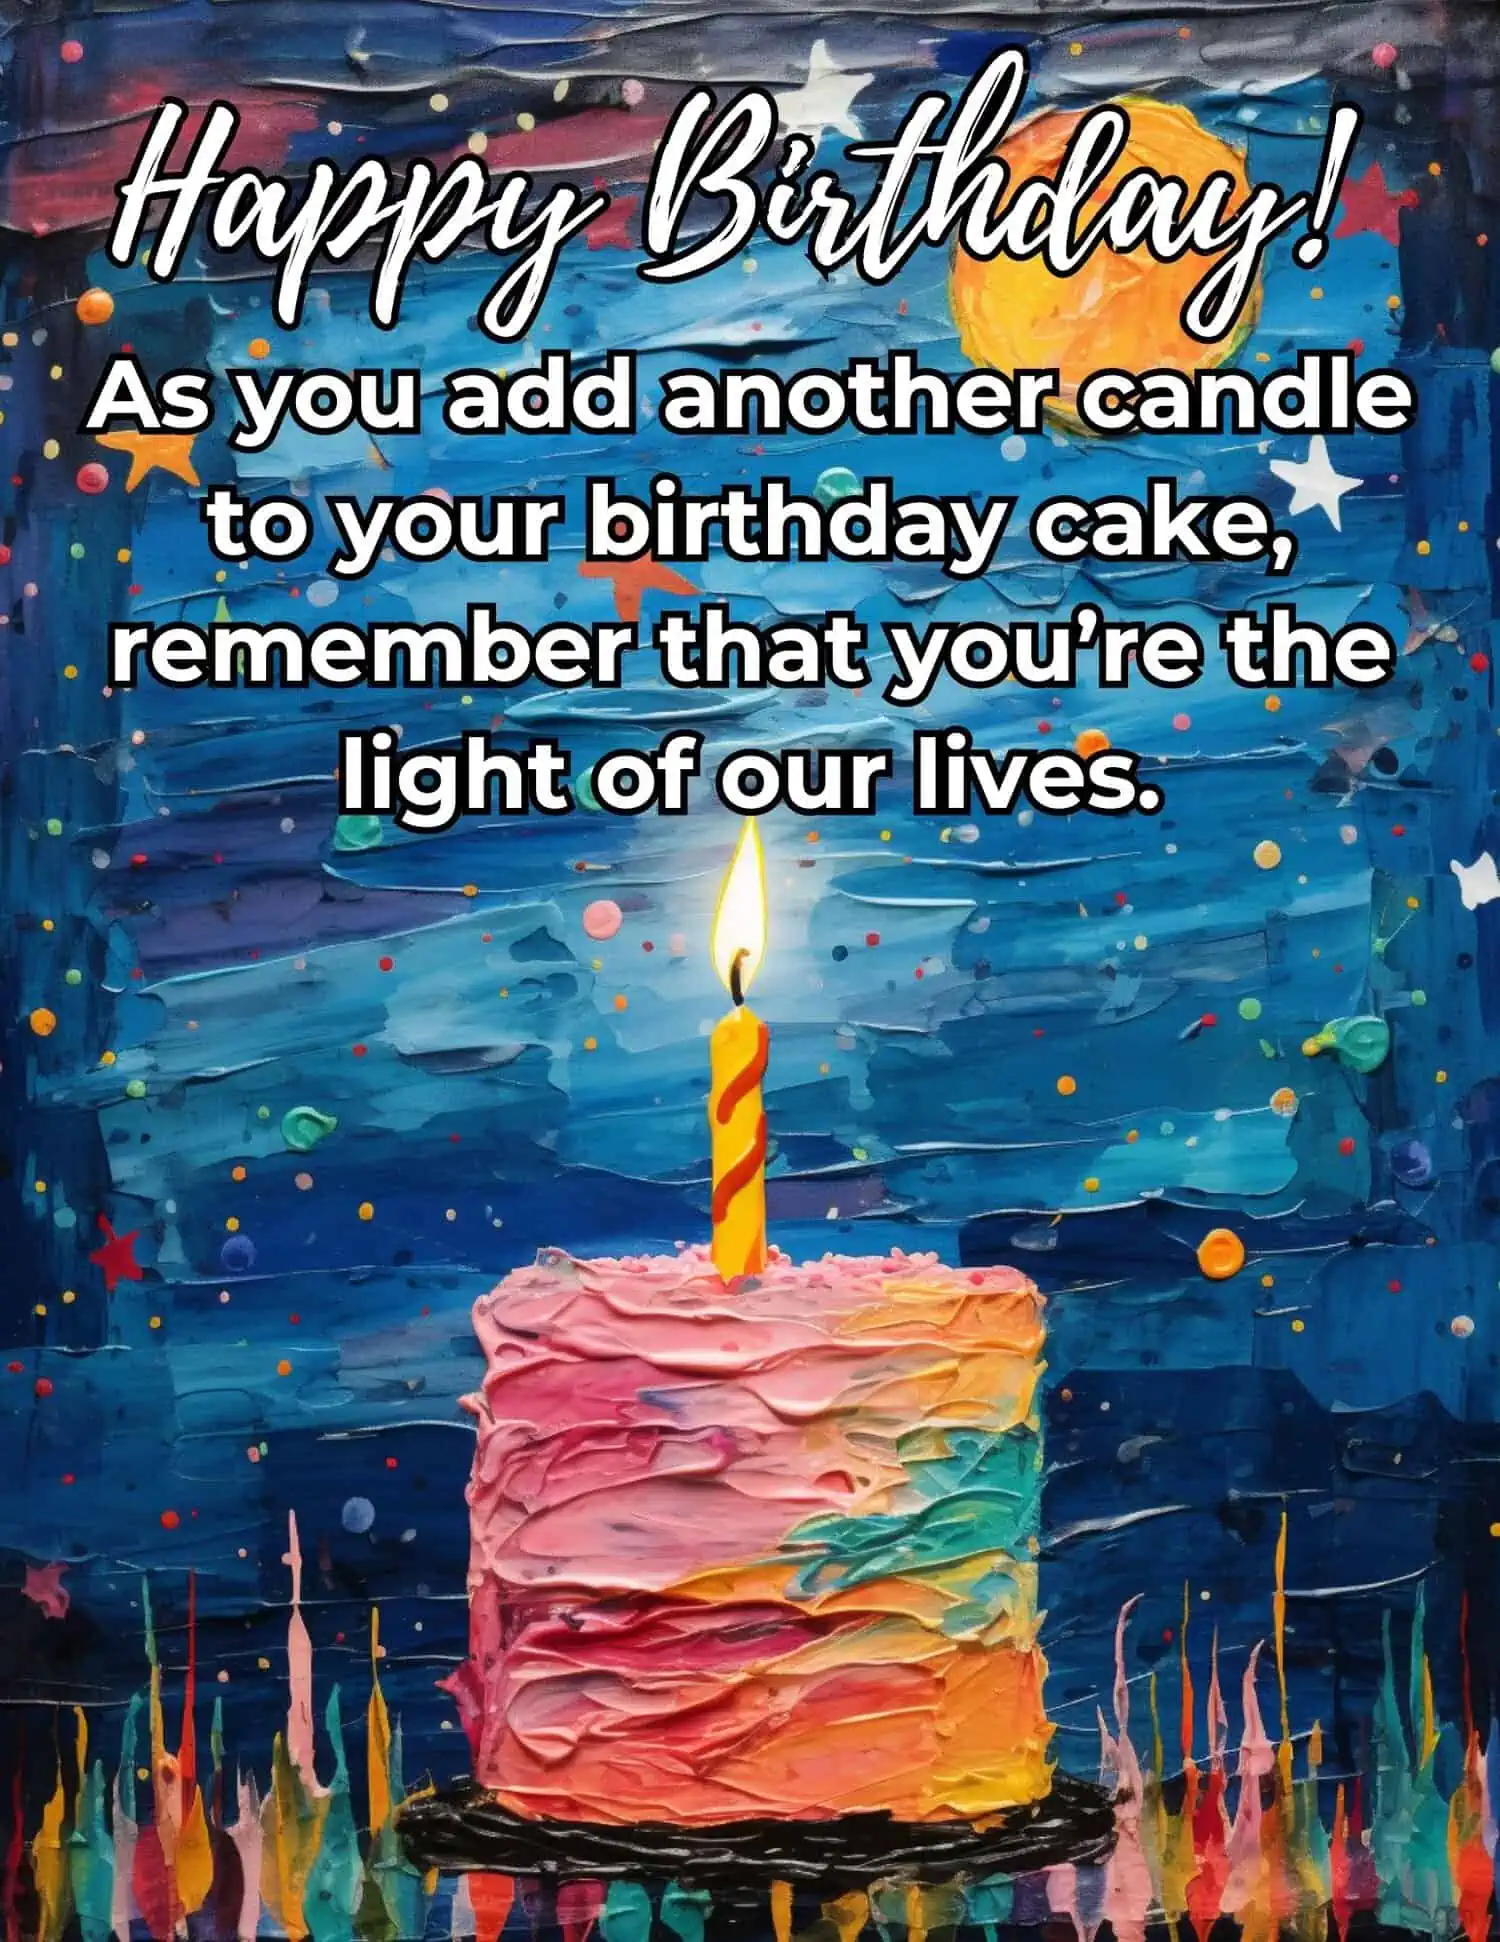 A collection of meaningful and heartfelt longer birthday messages for your son.